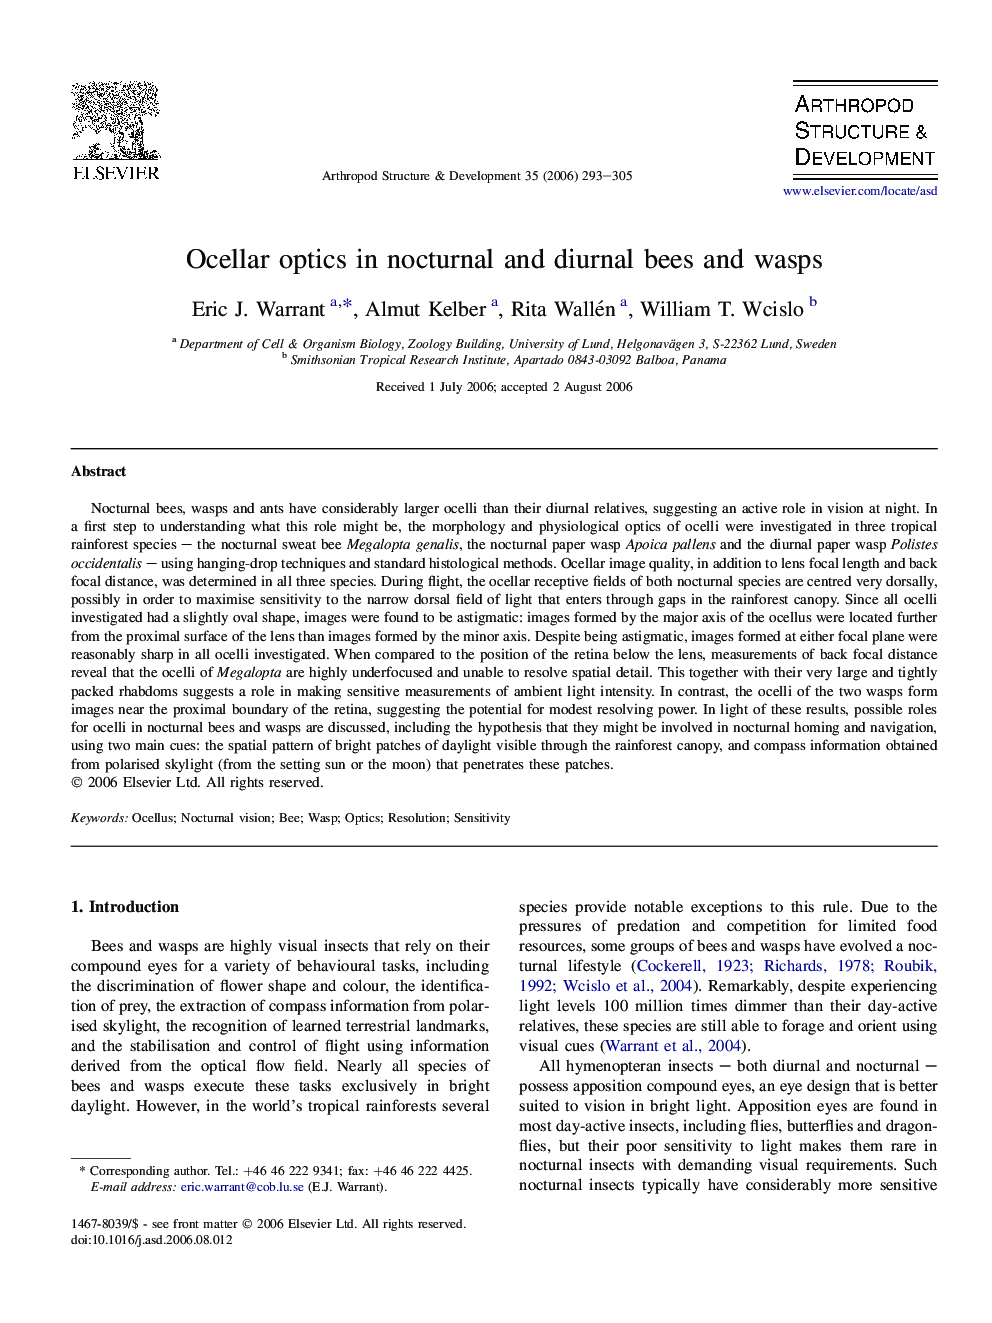 Ocellar optics in nocturnal and diurnal bees and wasps